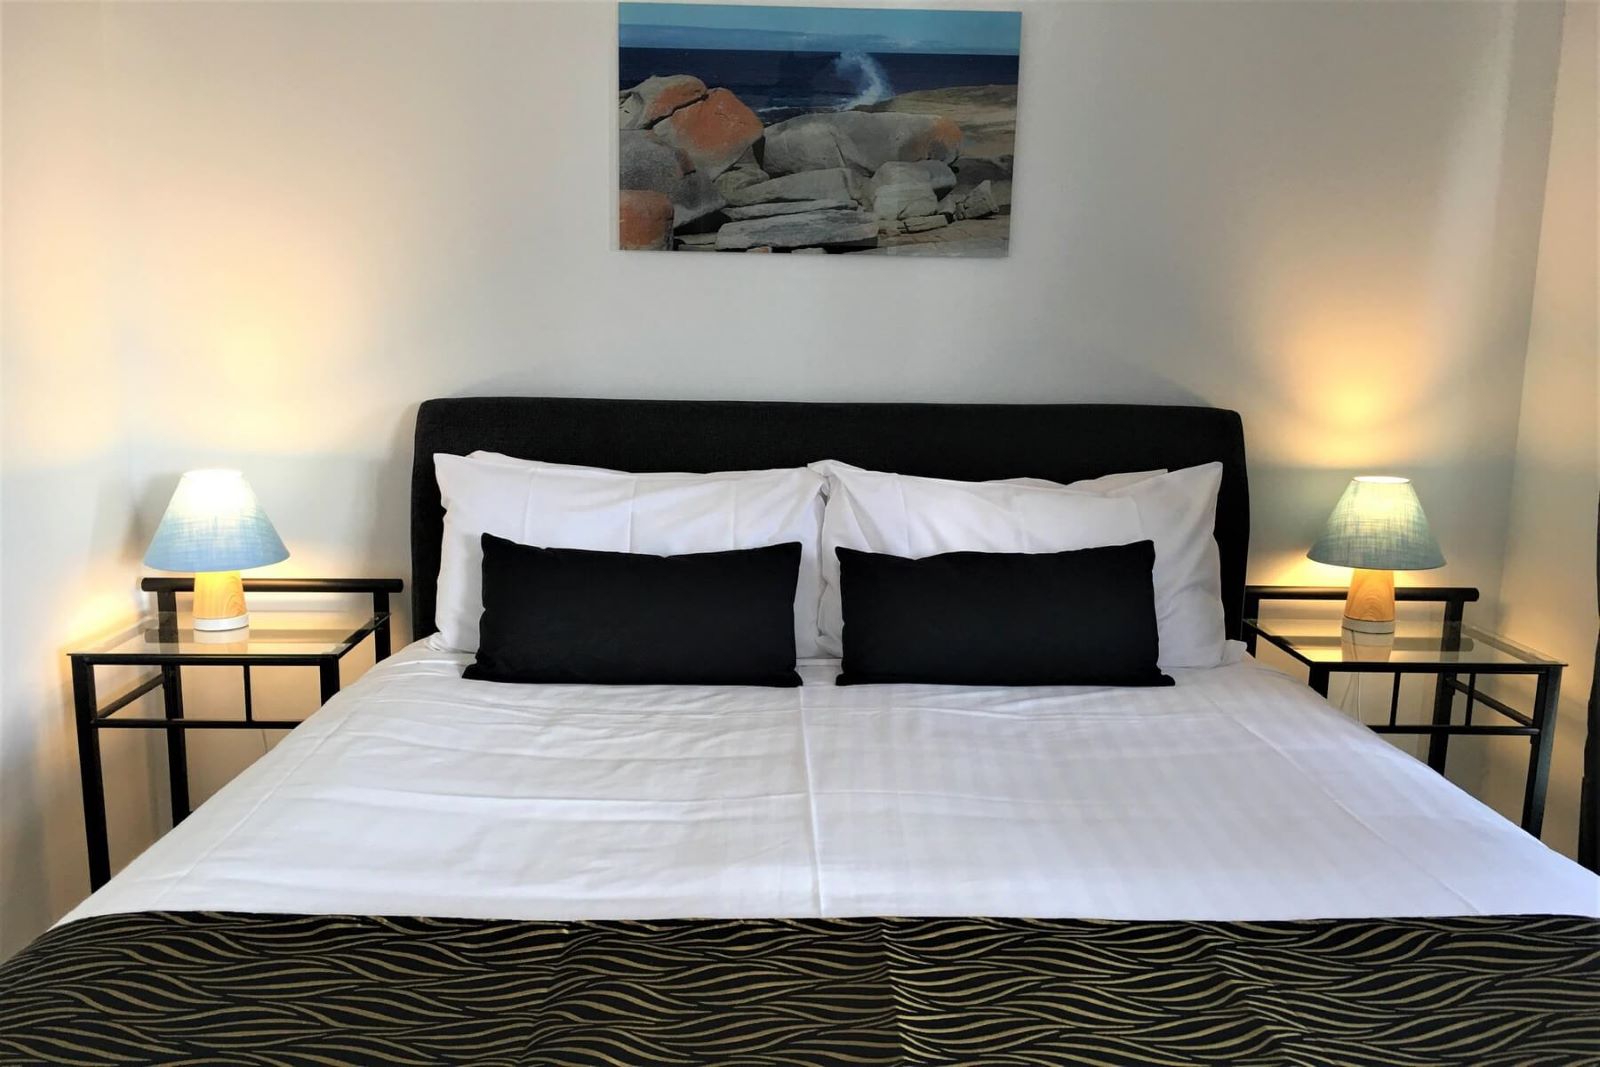 Comfortable room with queen size bed and sea views